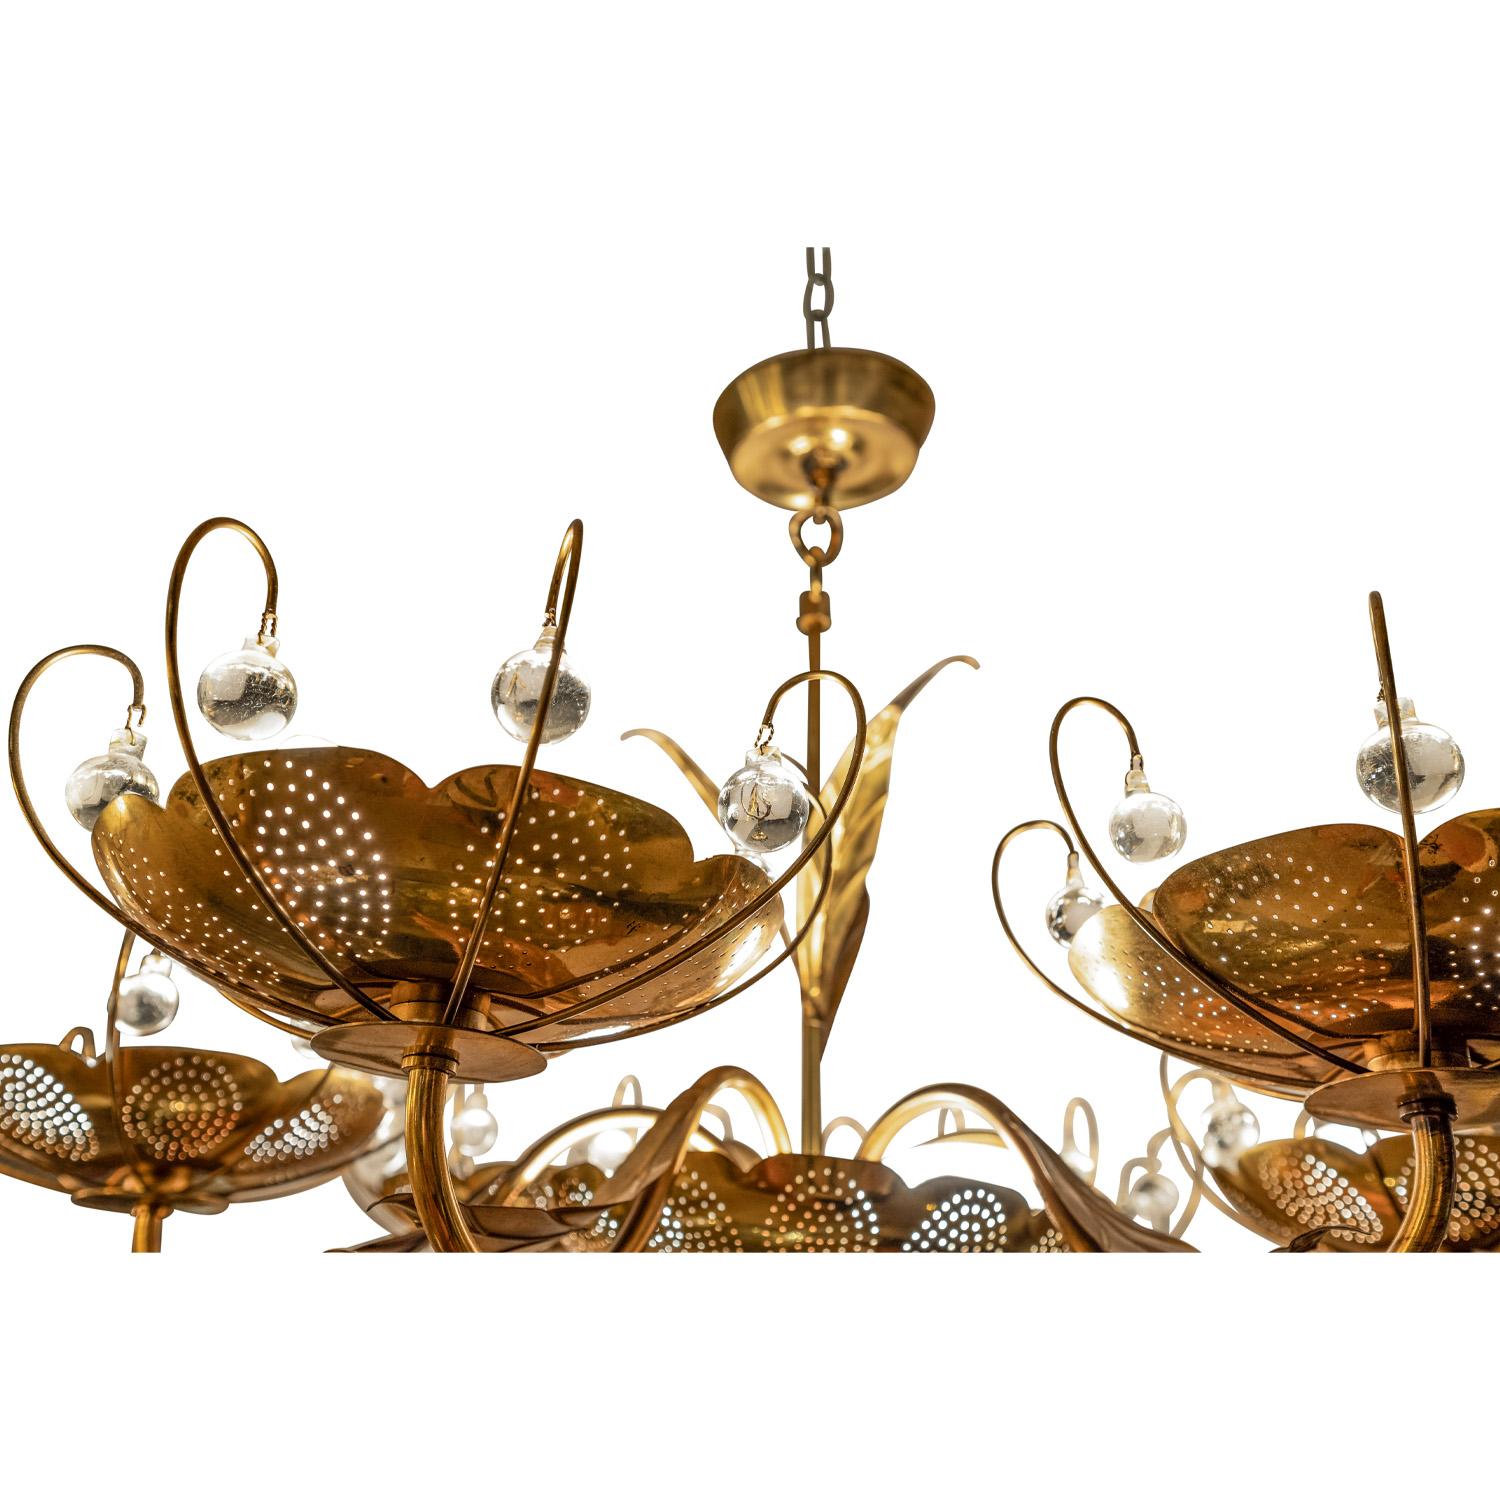 Hand-Crafted Paavo Tynell Style 6-Arm Chandelier in Brass with Leaf Motif and Crystals 1960s